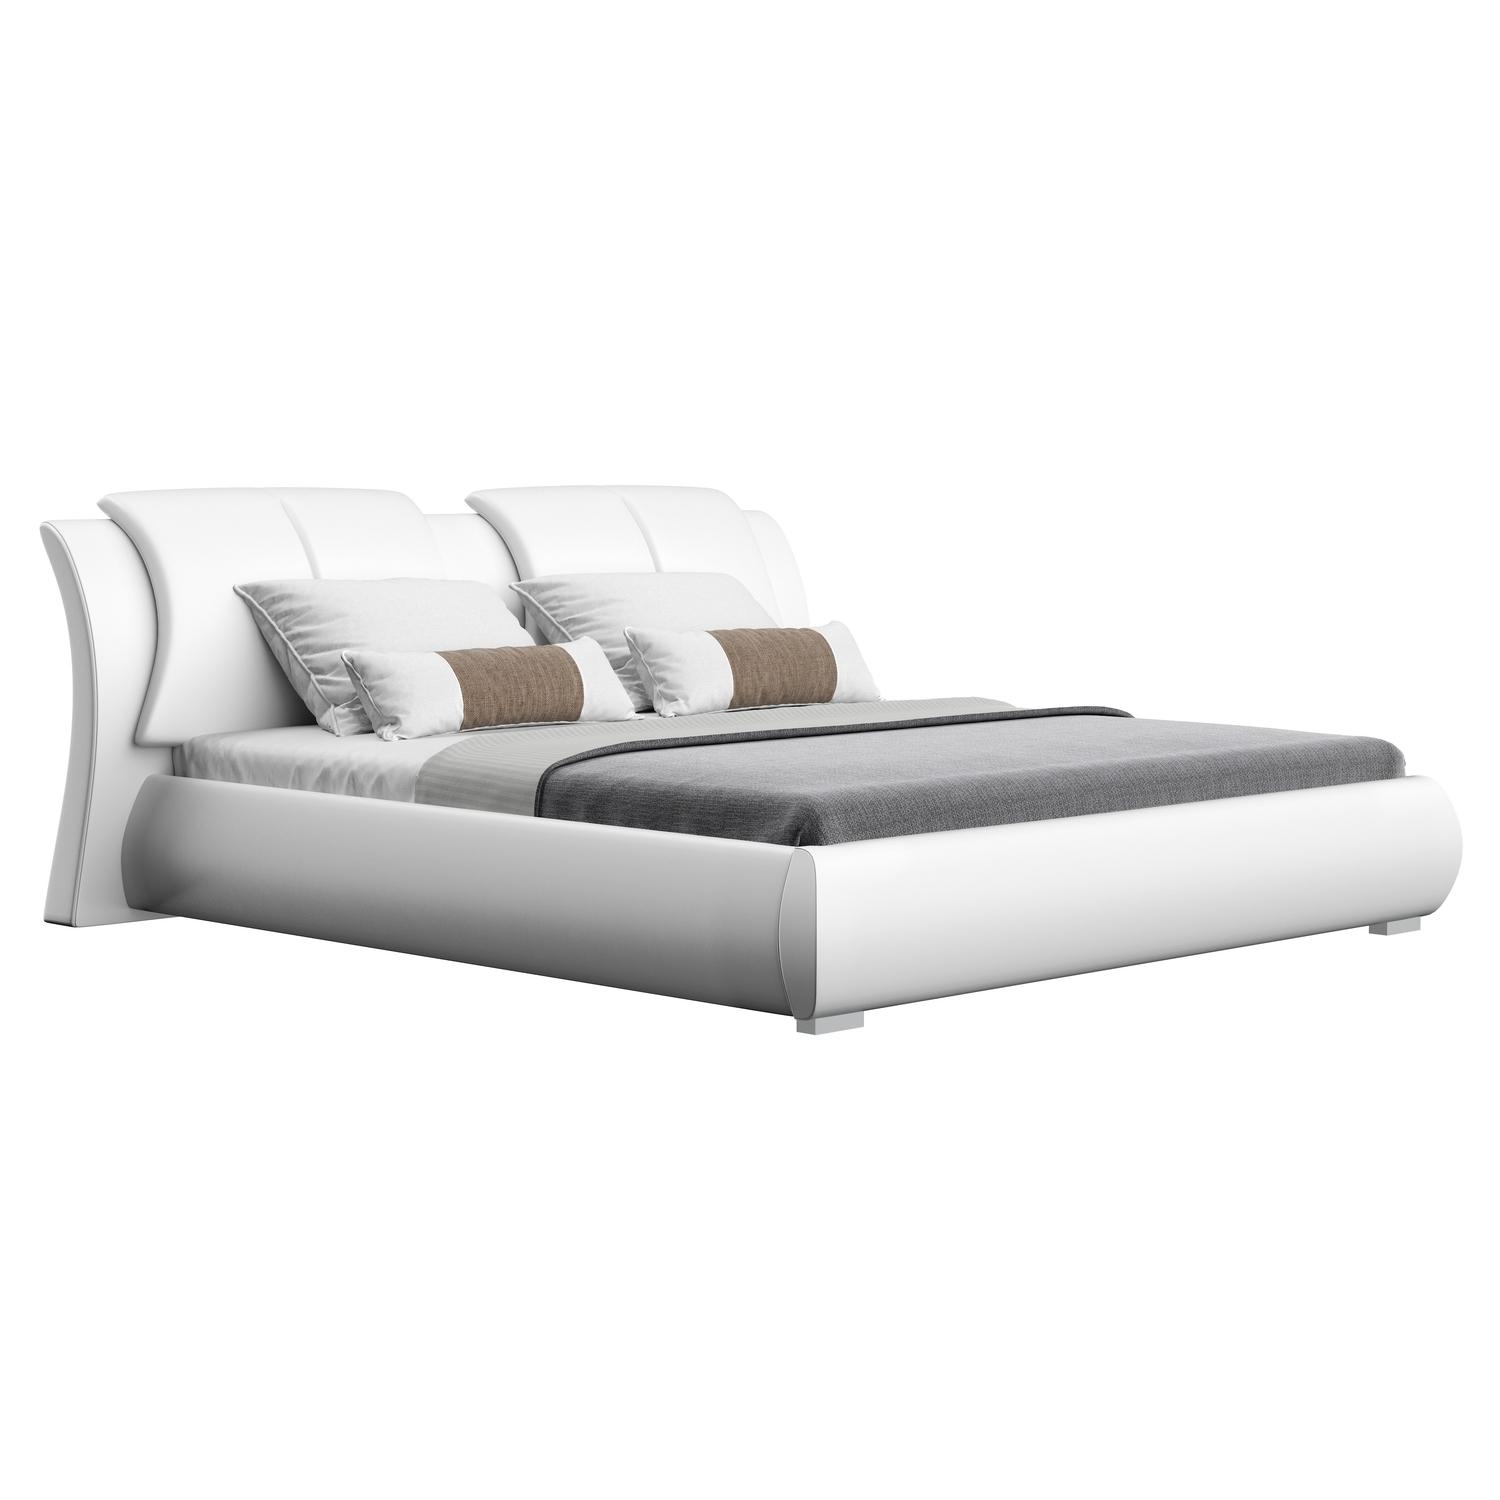 Contemporary, Modern Platform Bed 8269 8269-WH-KB in White Faux Leather